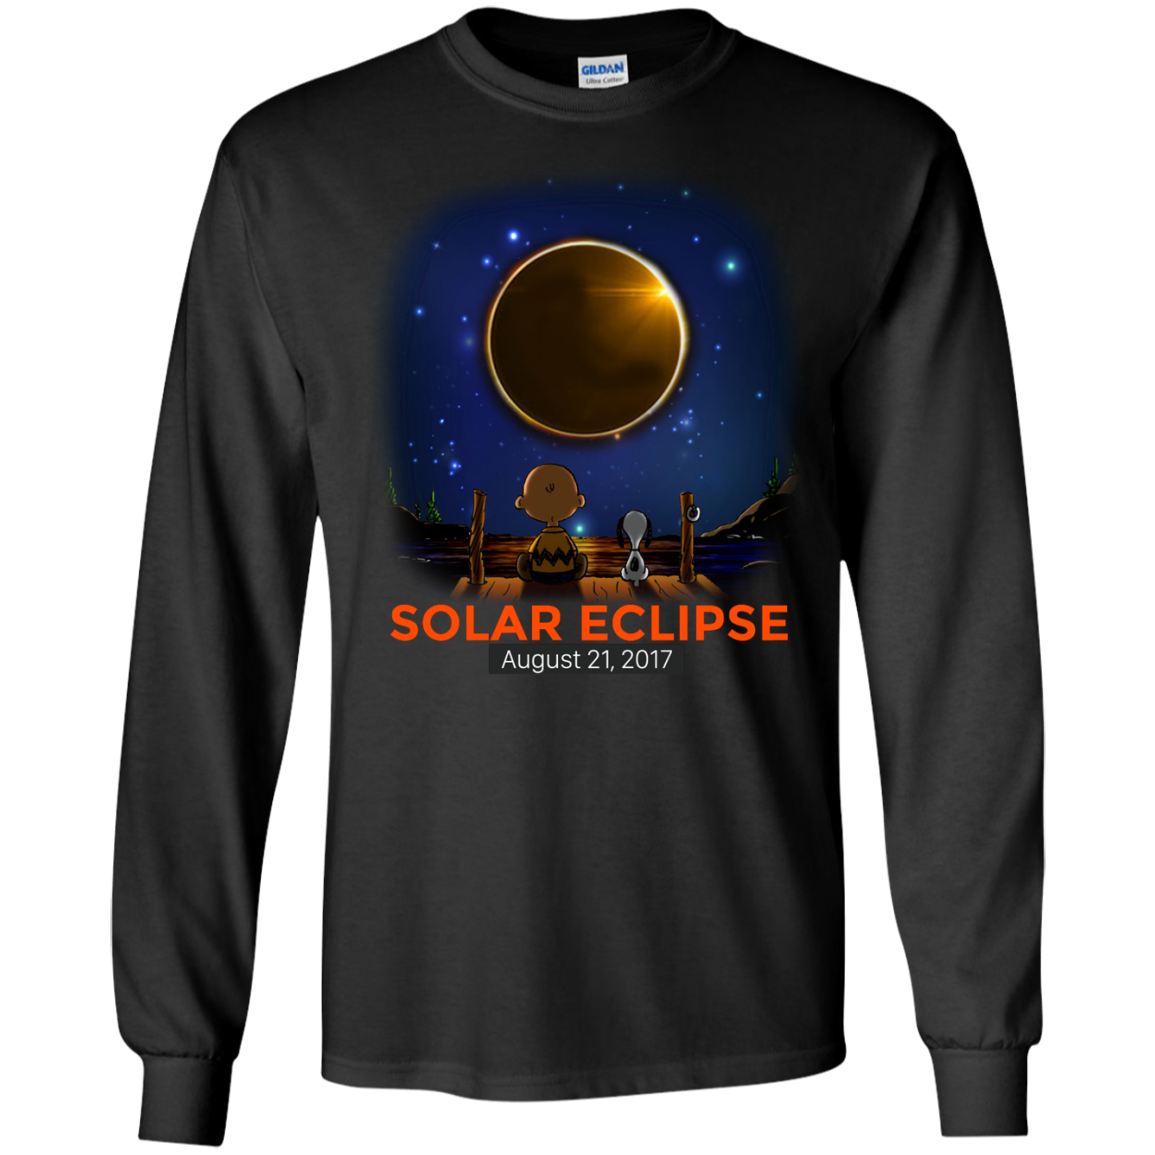 Snoopy and Charlie Brown: Solar Eclipse 2017 shirt, tank, hoodie ...